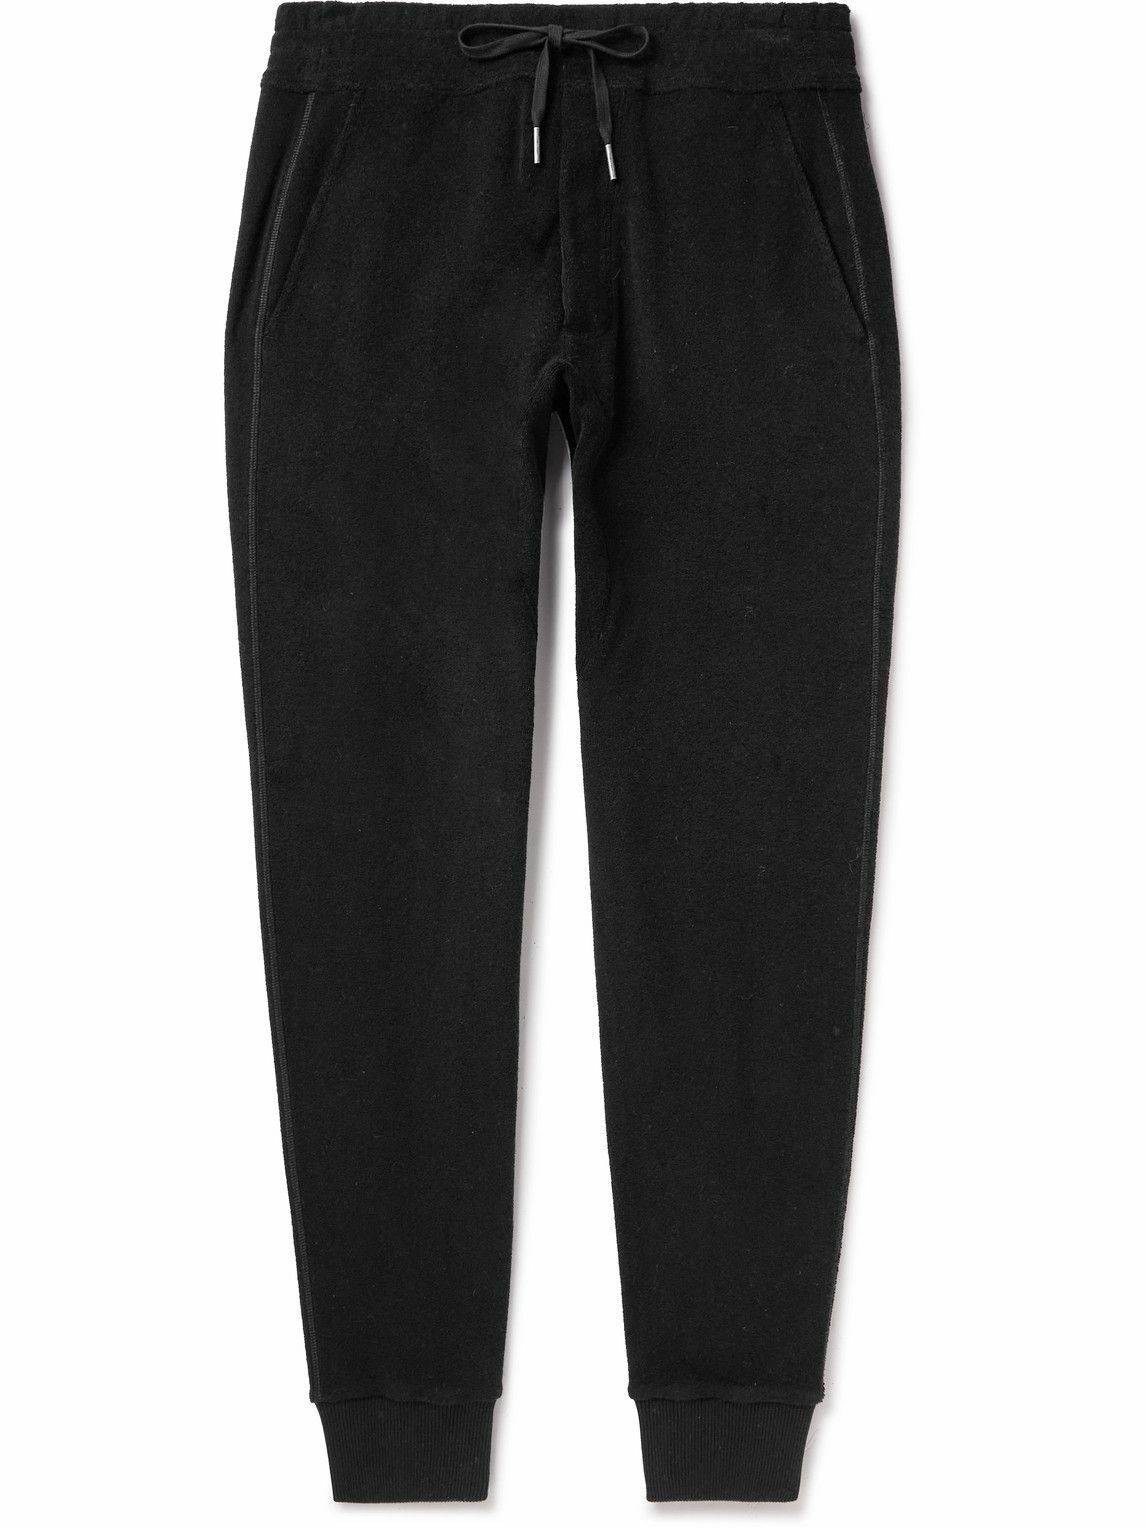 TOM FORD - Slim-Fit Tapered Cotton-Terry Sweatpants - Black TOM FORD